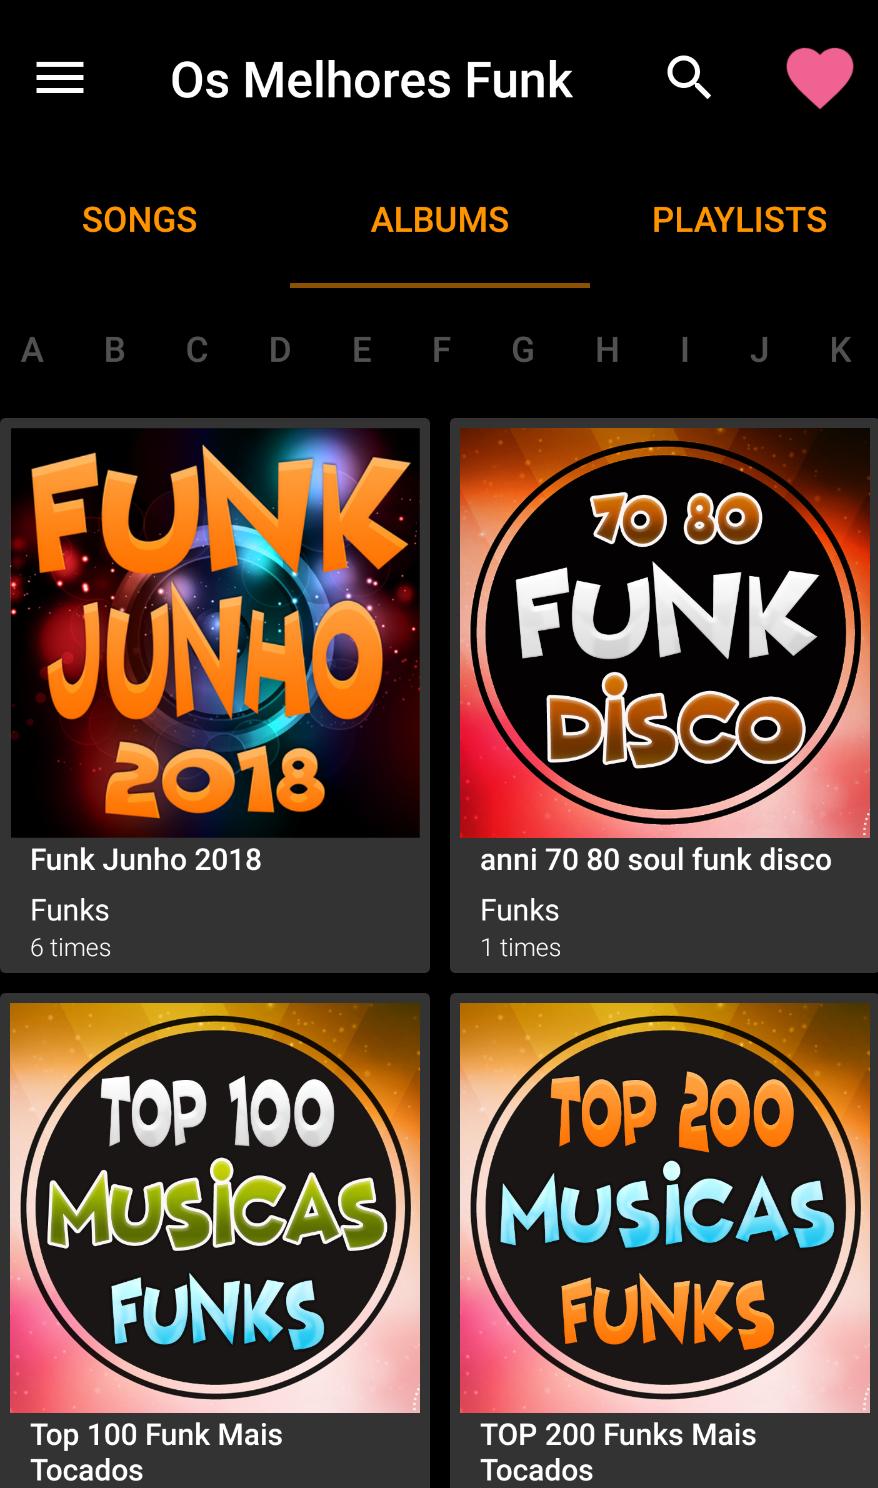 Os Melhores Funk for Android - APK Download